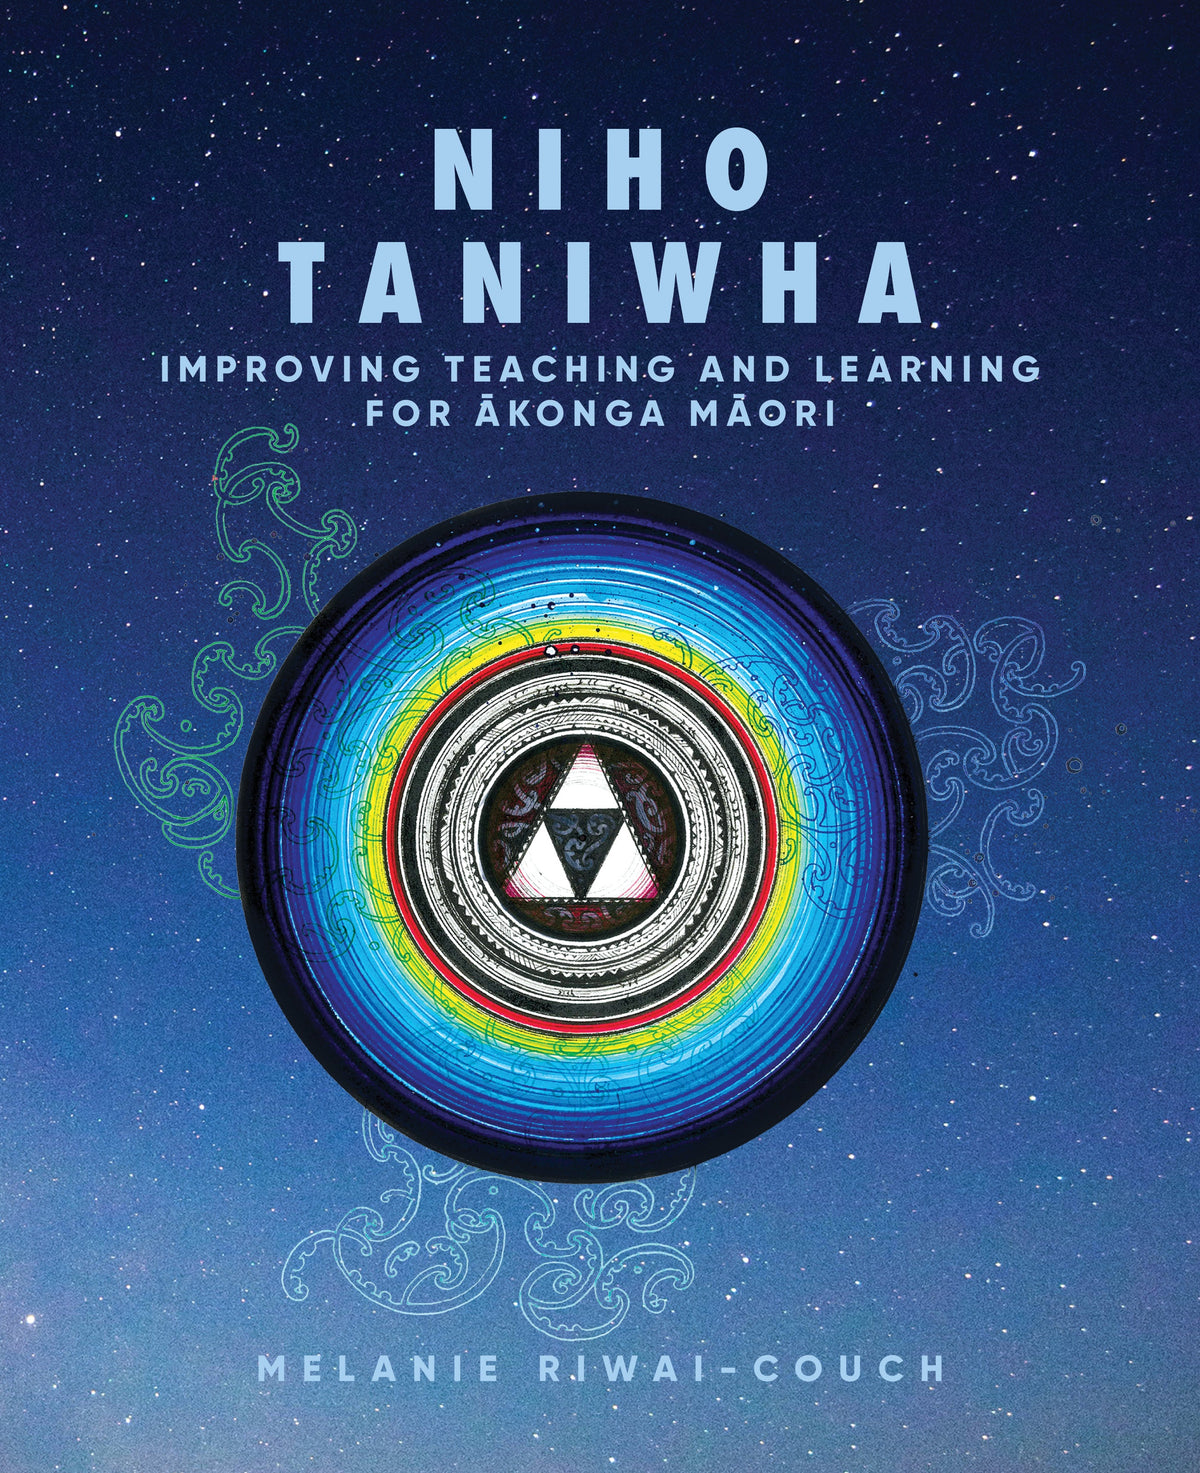 Niho Taniwha Improving Teaching and Learning for Ākonga Māori by Melanie Riwai-Couch